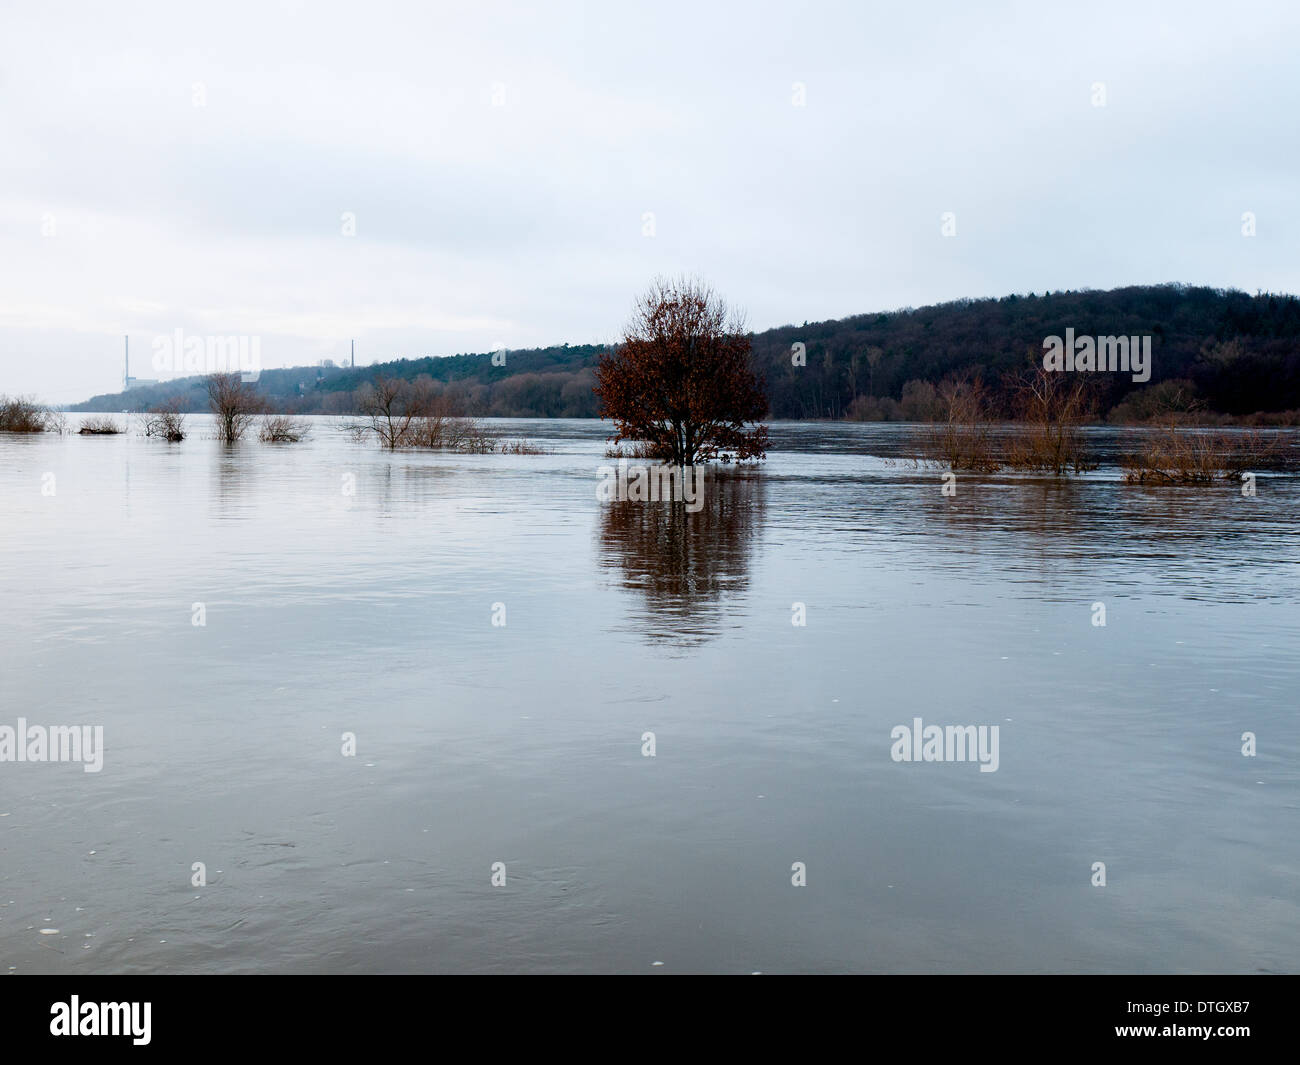 Flood on the River Elbe near Geesthacht, Germany. Stock Photo